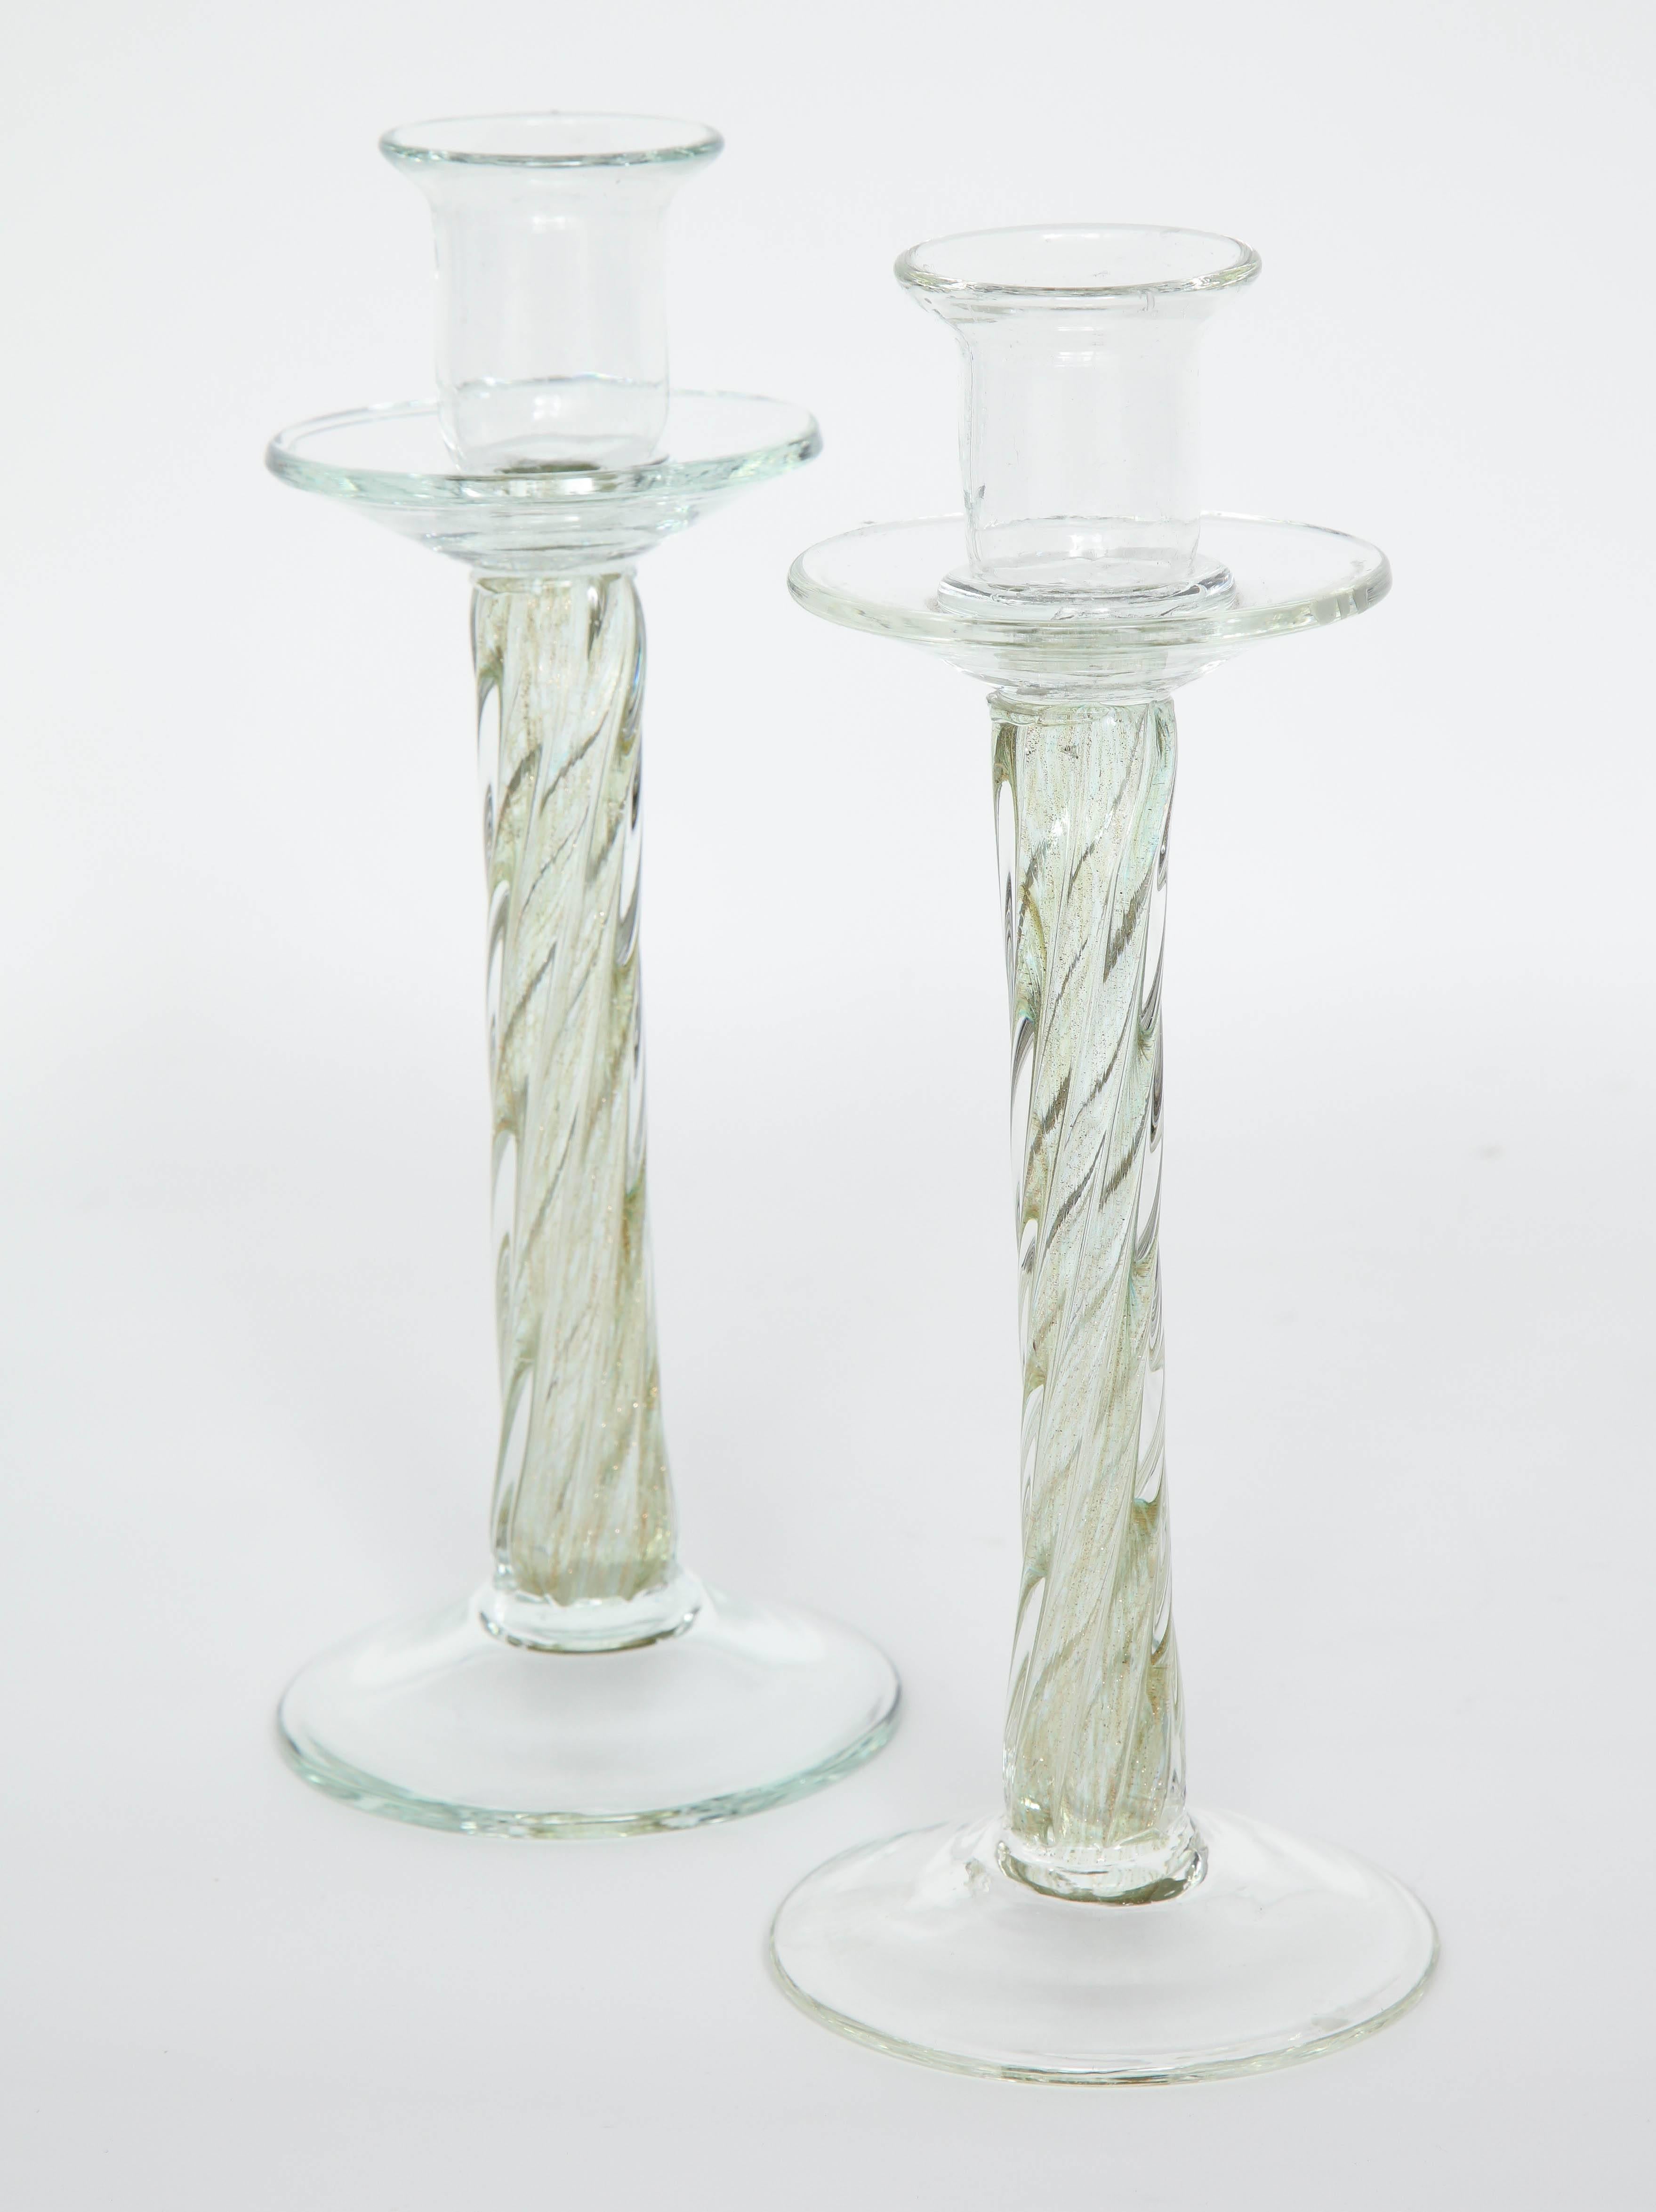 Pair of Mid-Century Murano glass candlesticks with pale green centers with 22-karat gold dust inclusions.